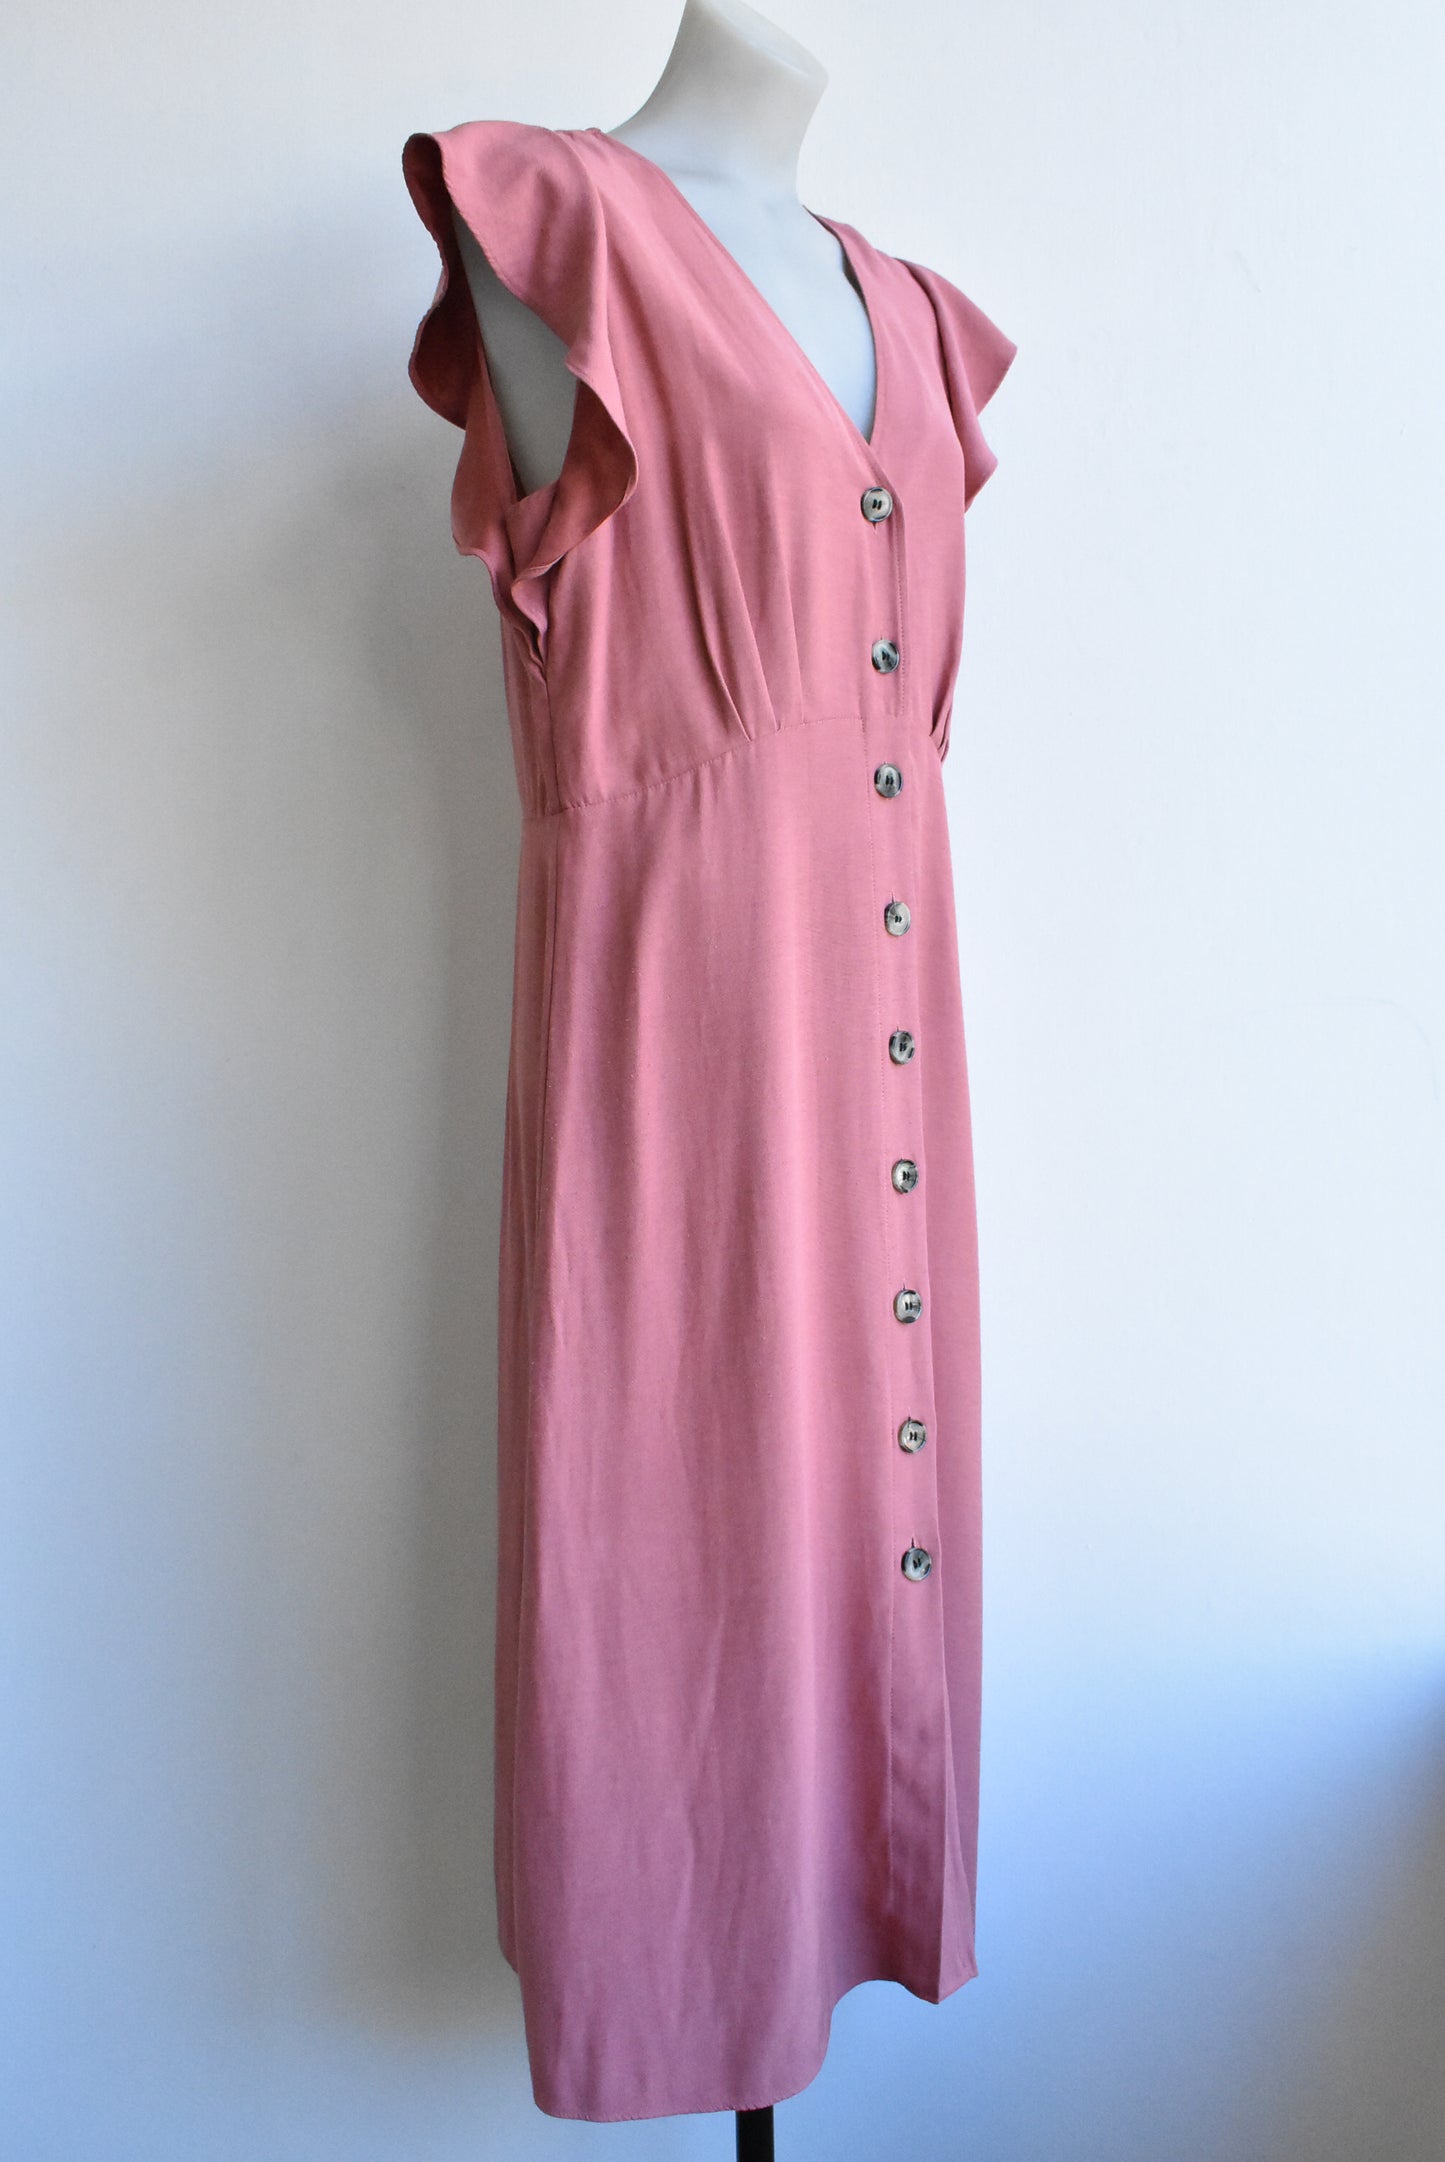 Witchery pink buttoned dress, size 12